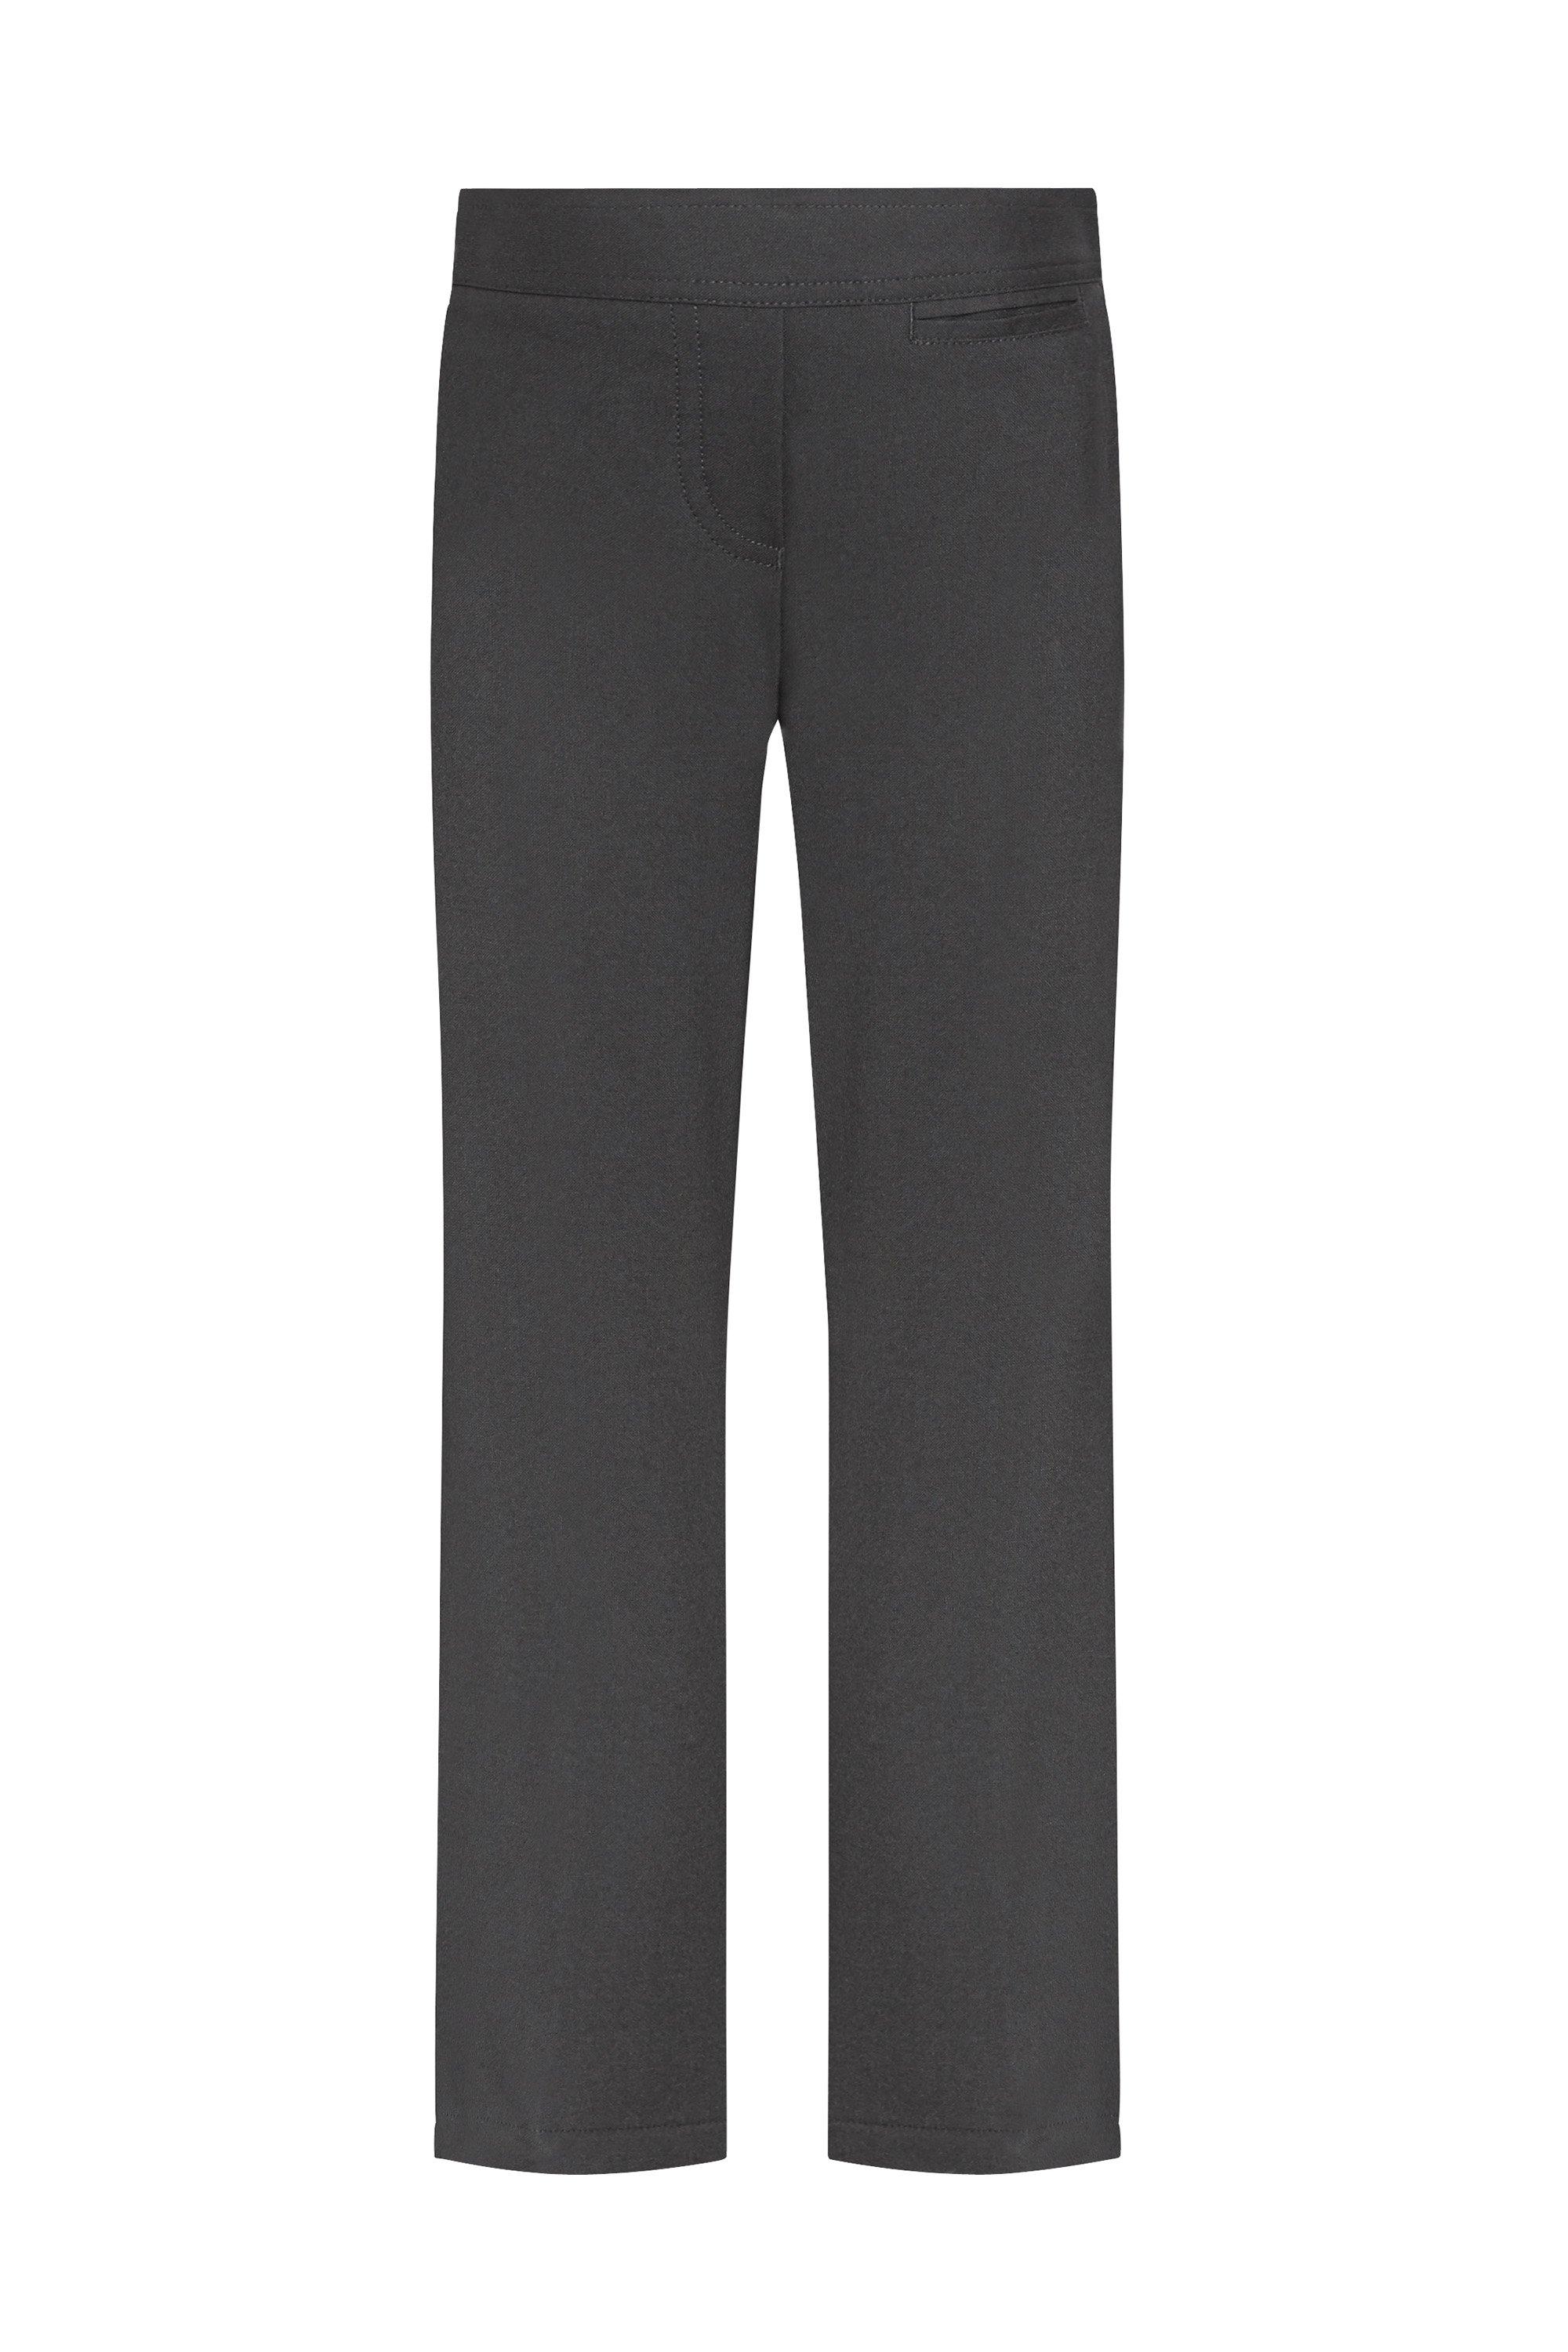 Senior Girls' Fit Tailored Tapered Leg School Trousers (11-16+ Years)